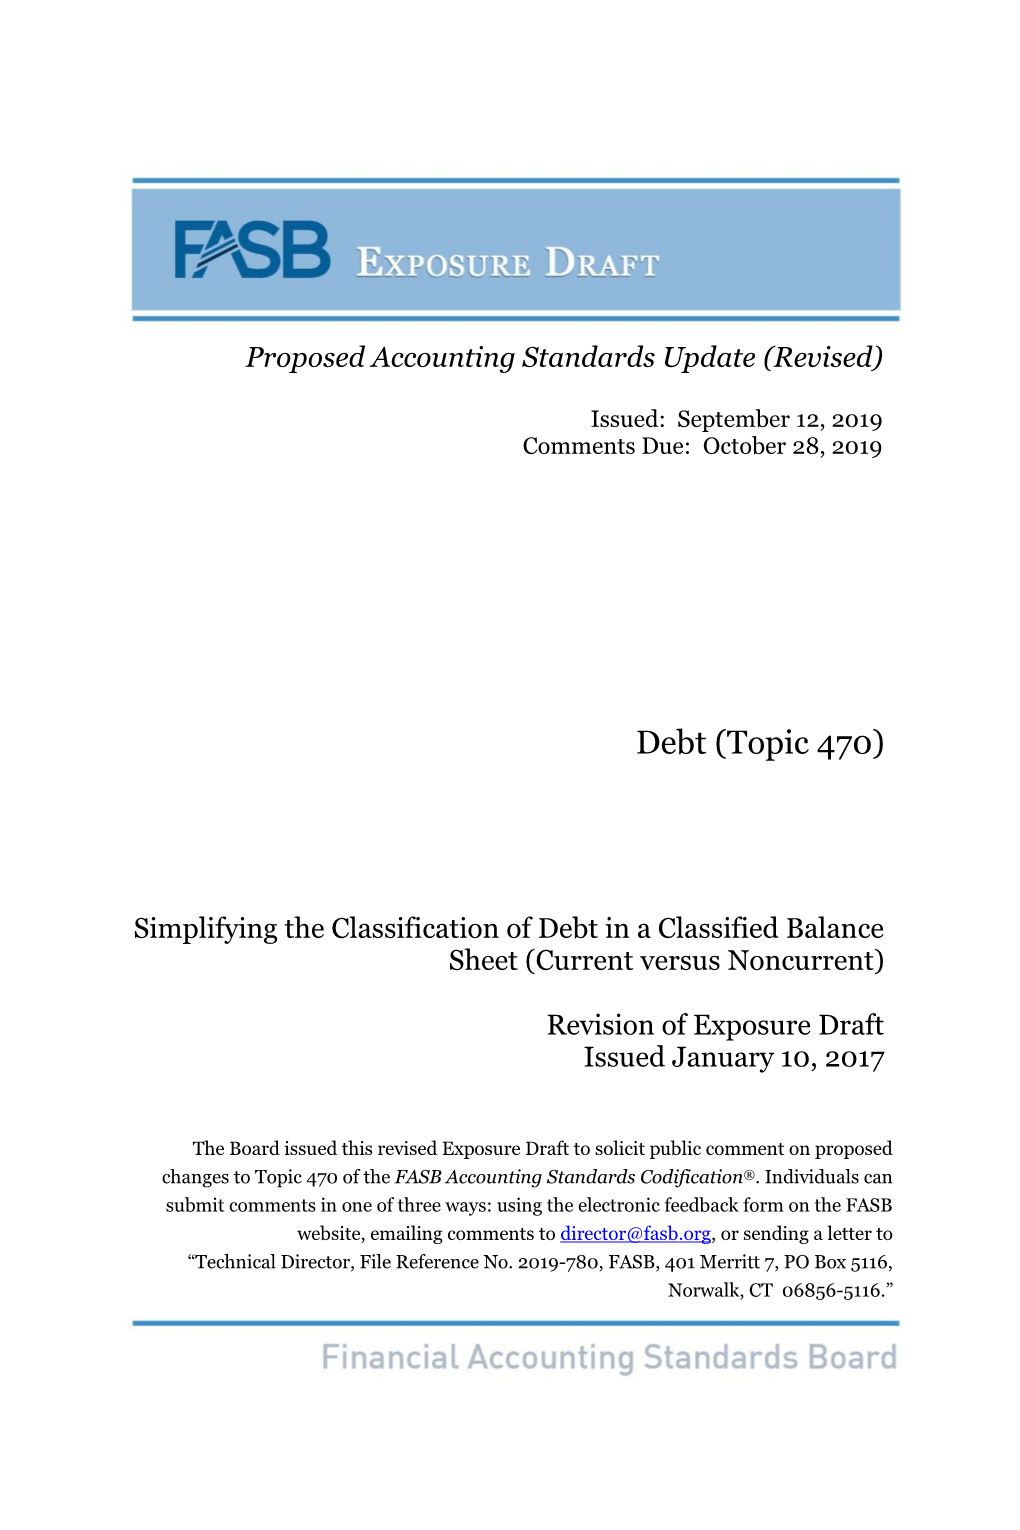 (Topic 470): Simplifying the Classification of Debt in a Classified Balanc